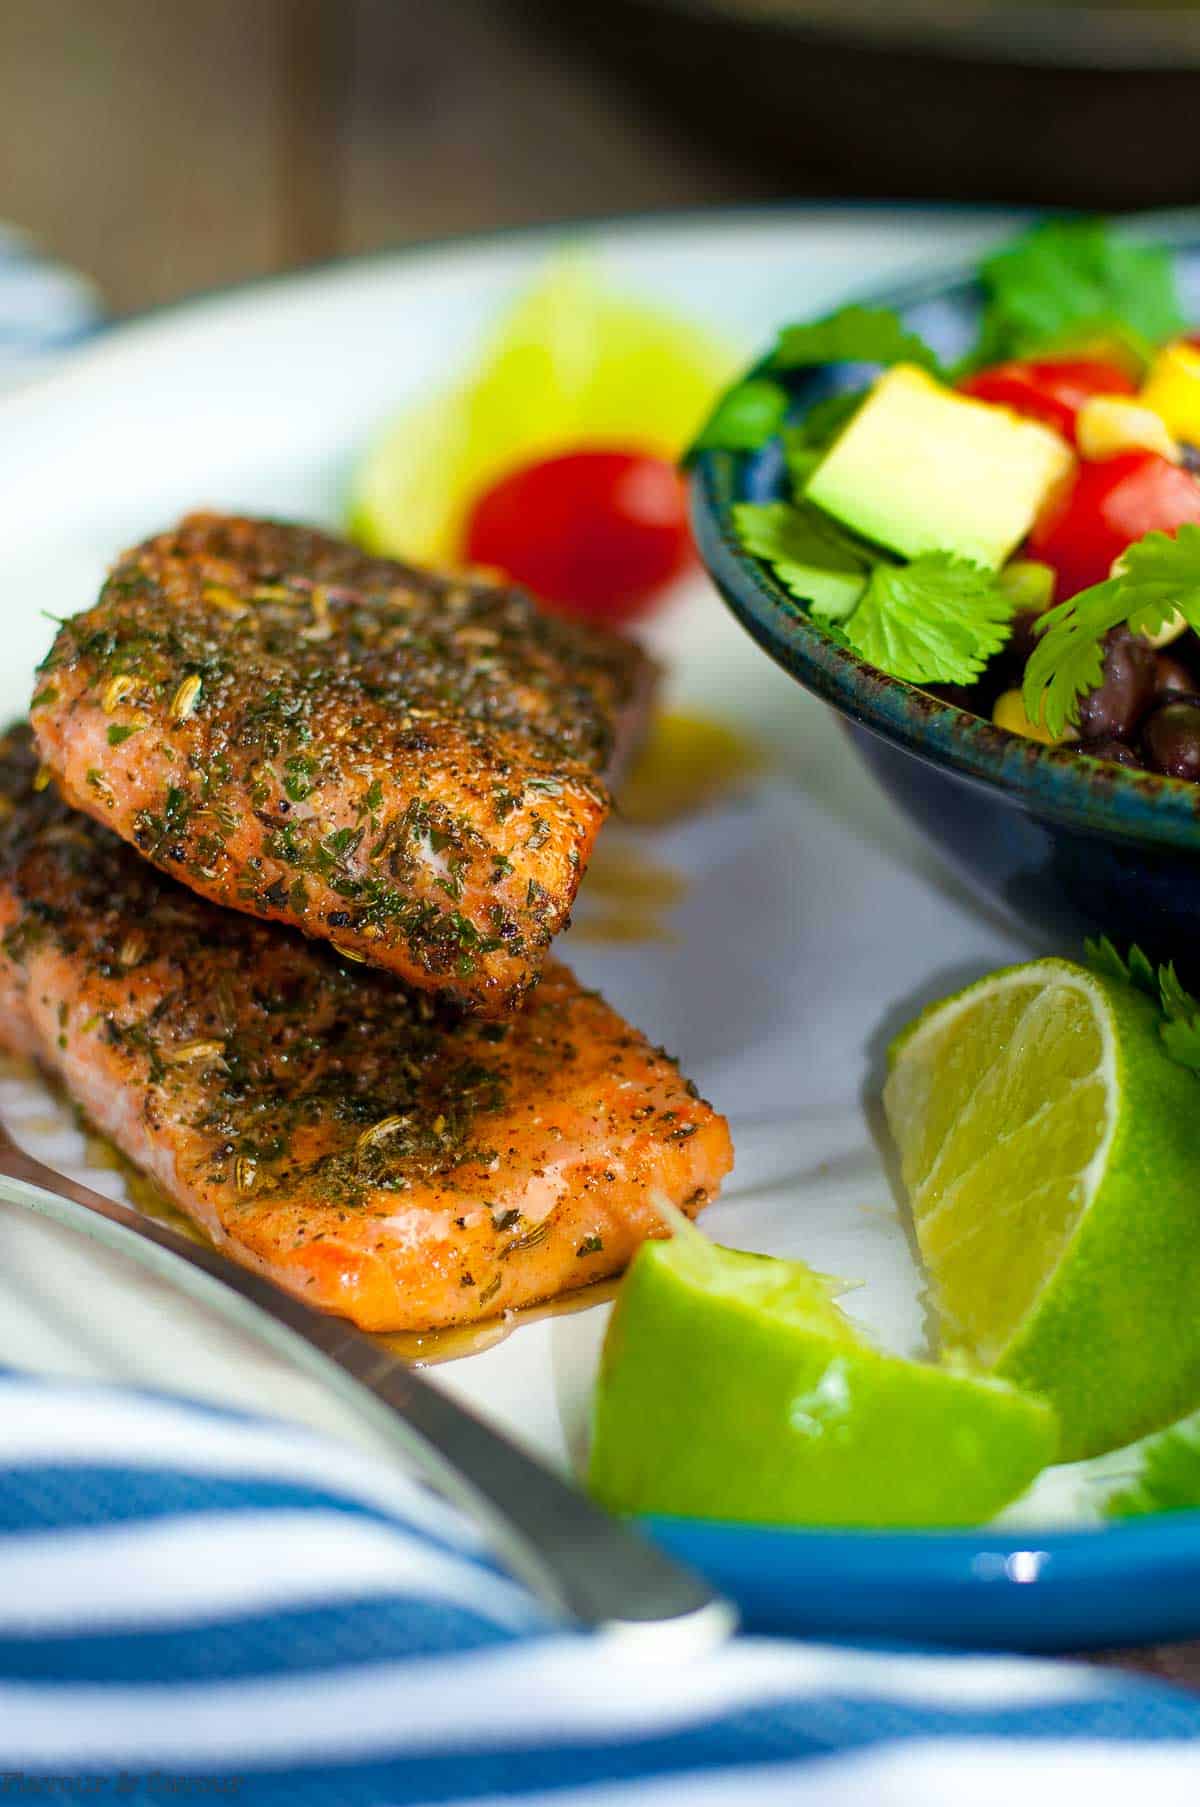 Jerk salmon and black bean salad with lime wedges.